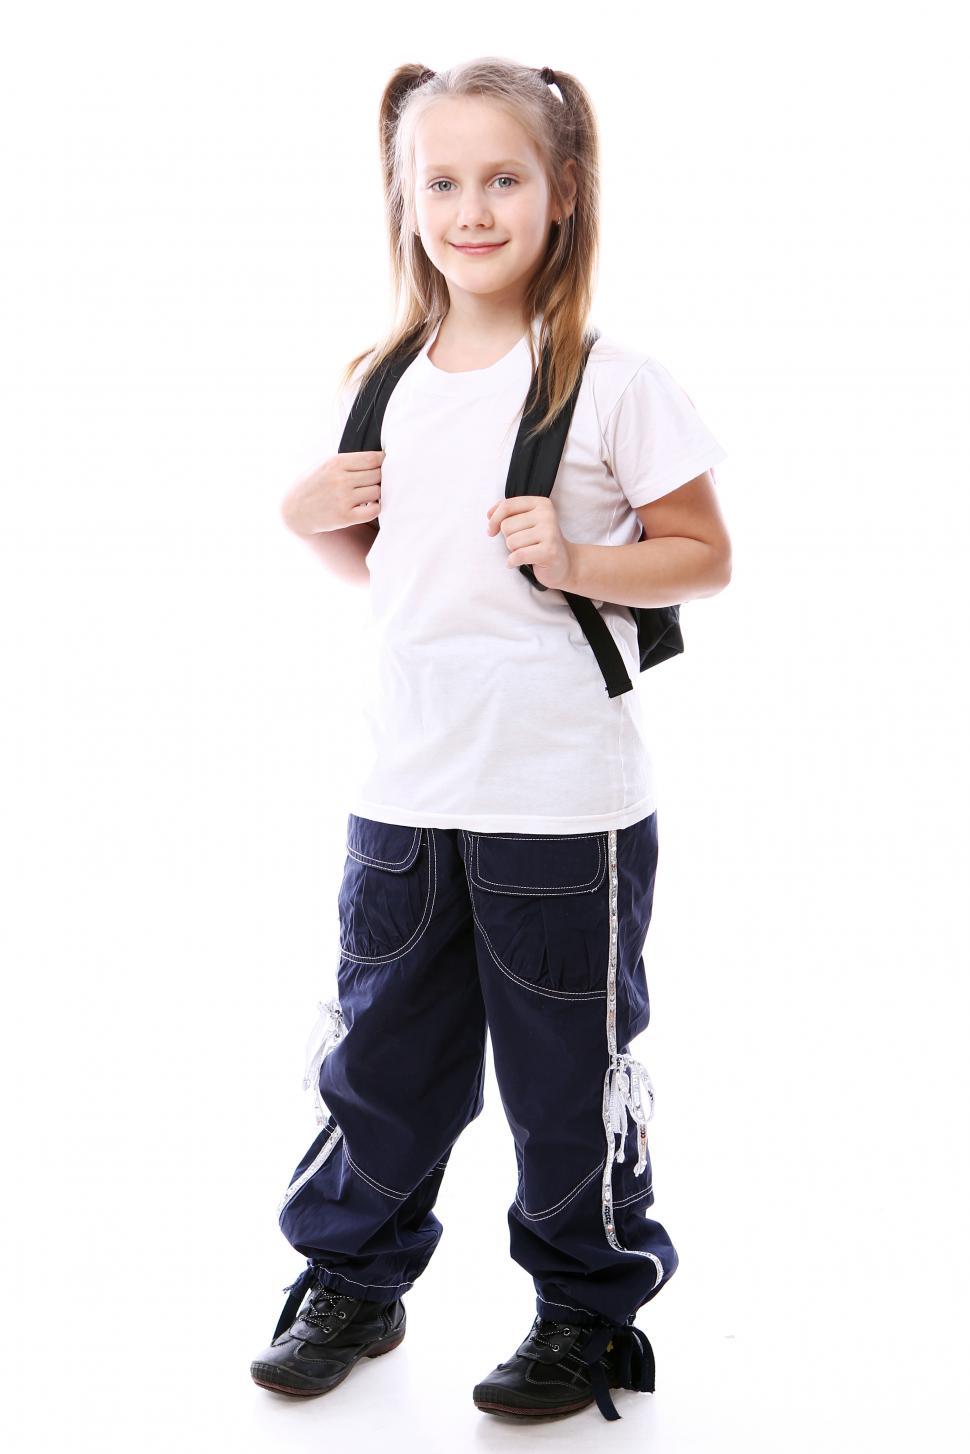 Free Image of Cute kid with schoolbag 